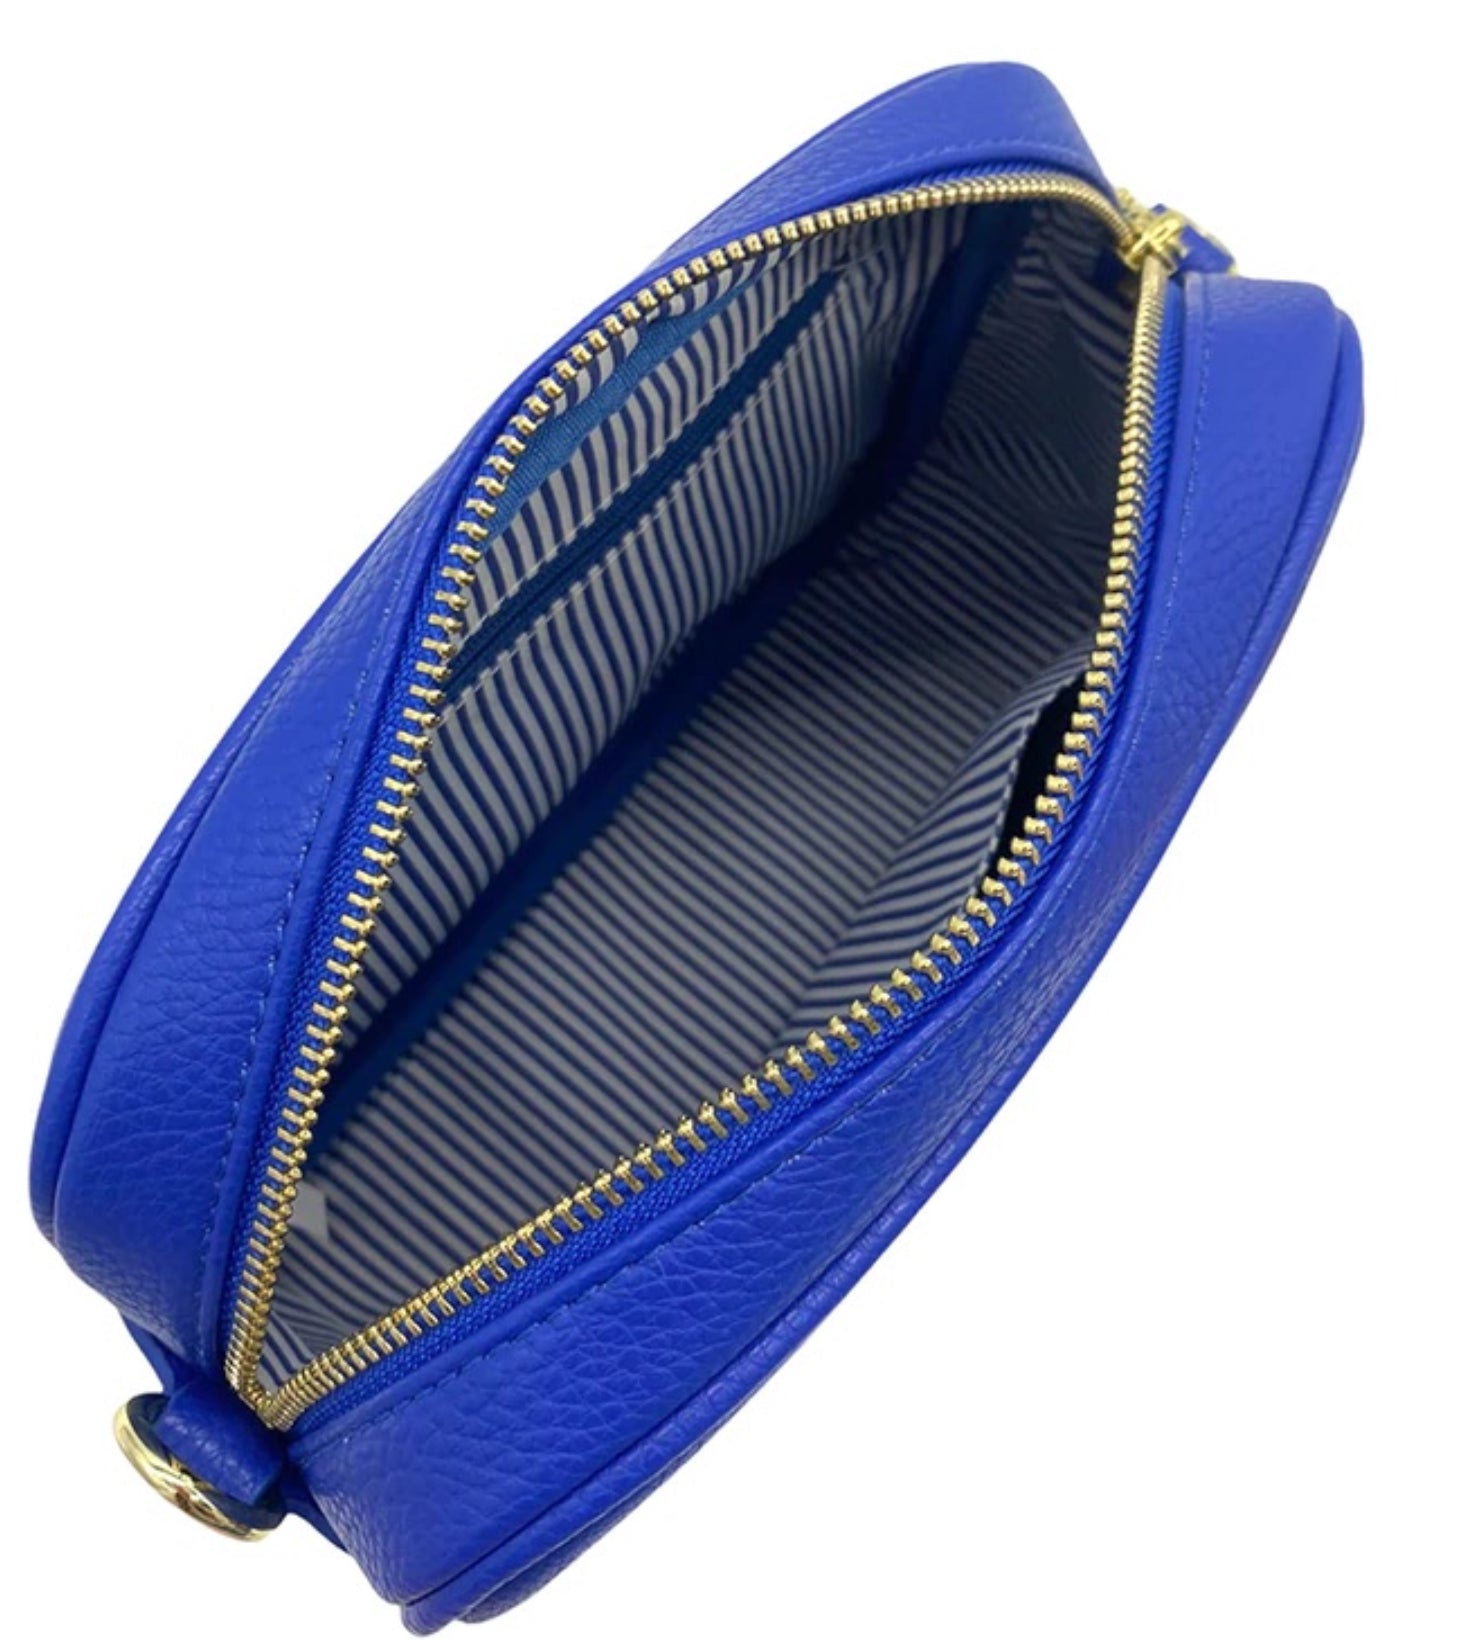 COBALT BLUE small leather bag . Cross body / shoulder bag in GENUINE l –  Handmade suede bags by Good Times Barcelona